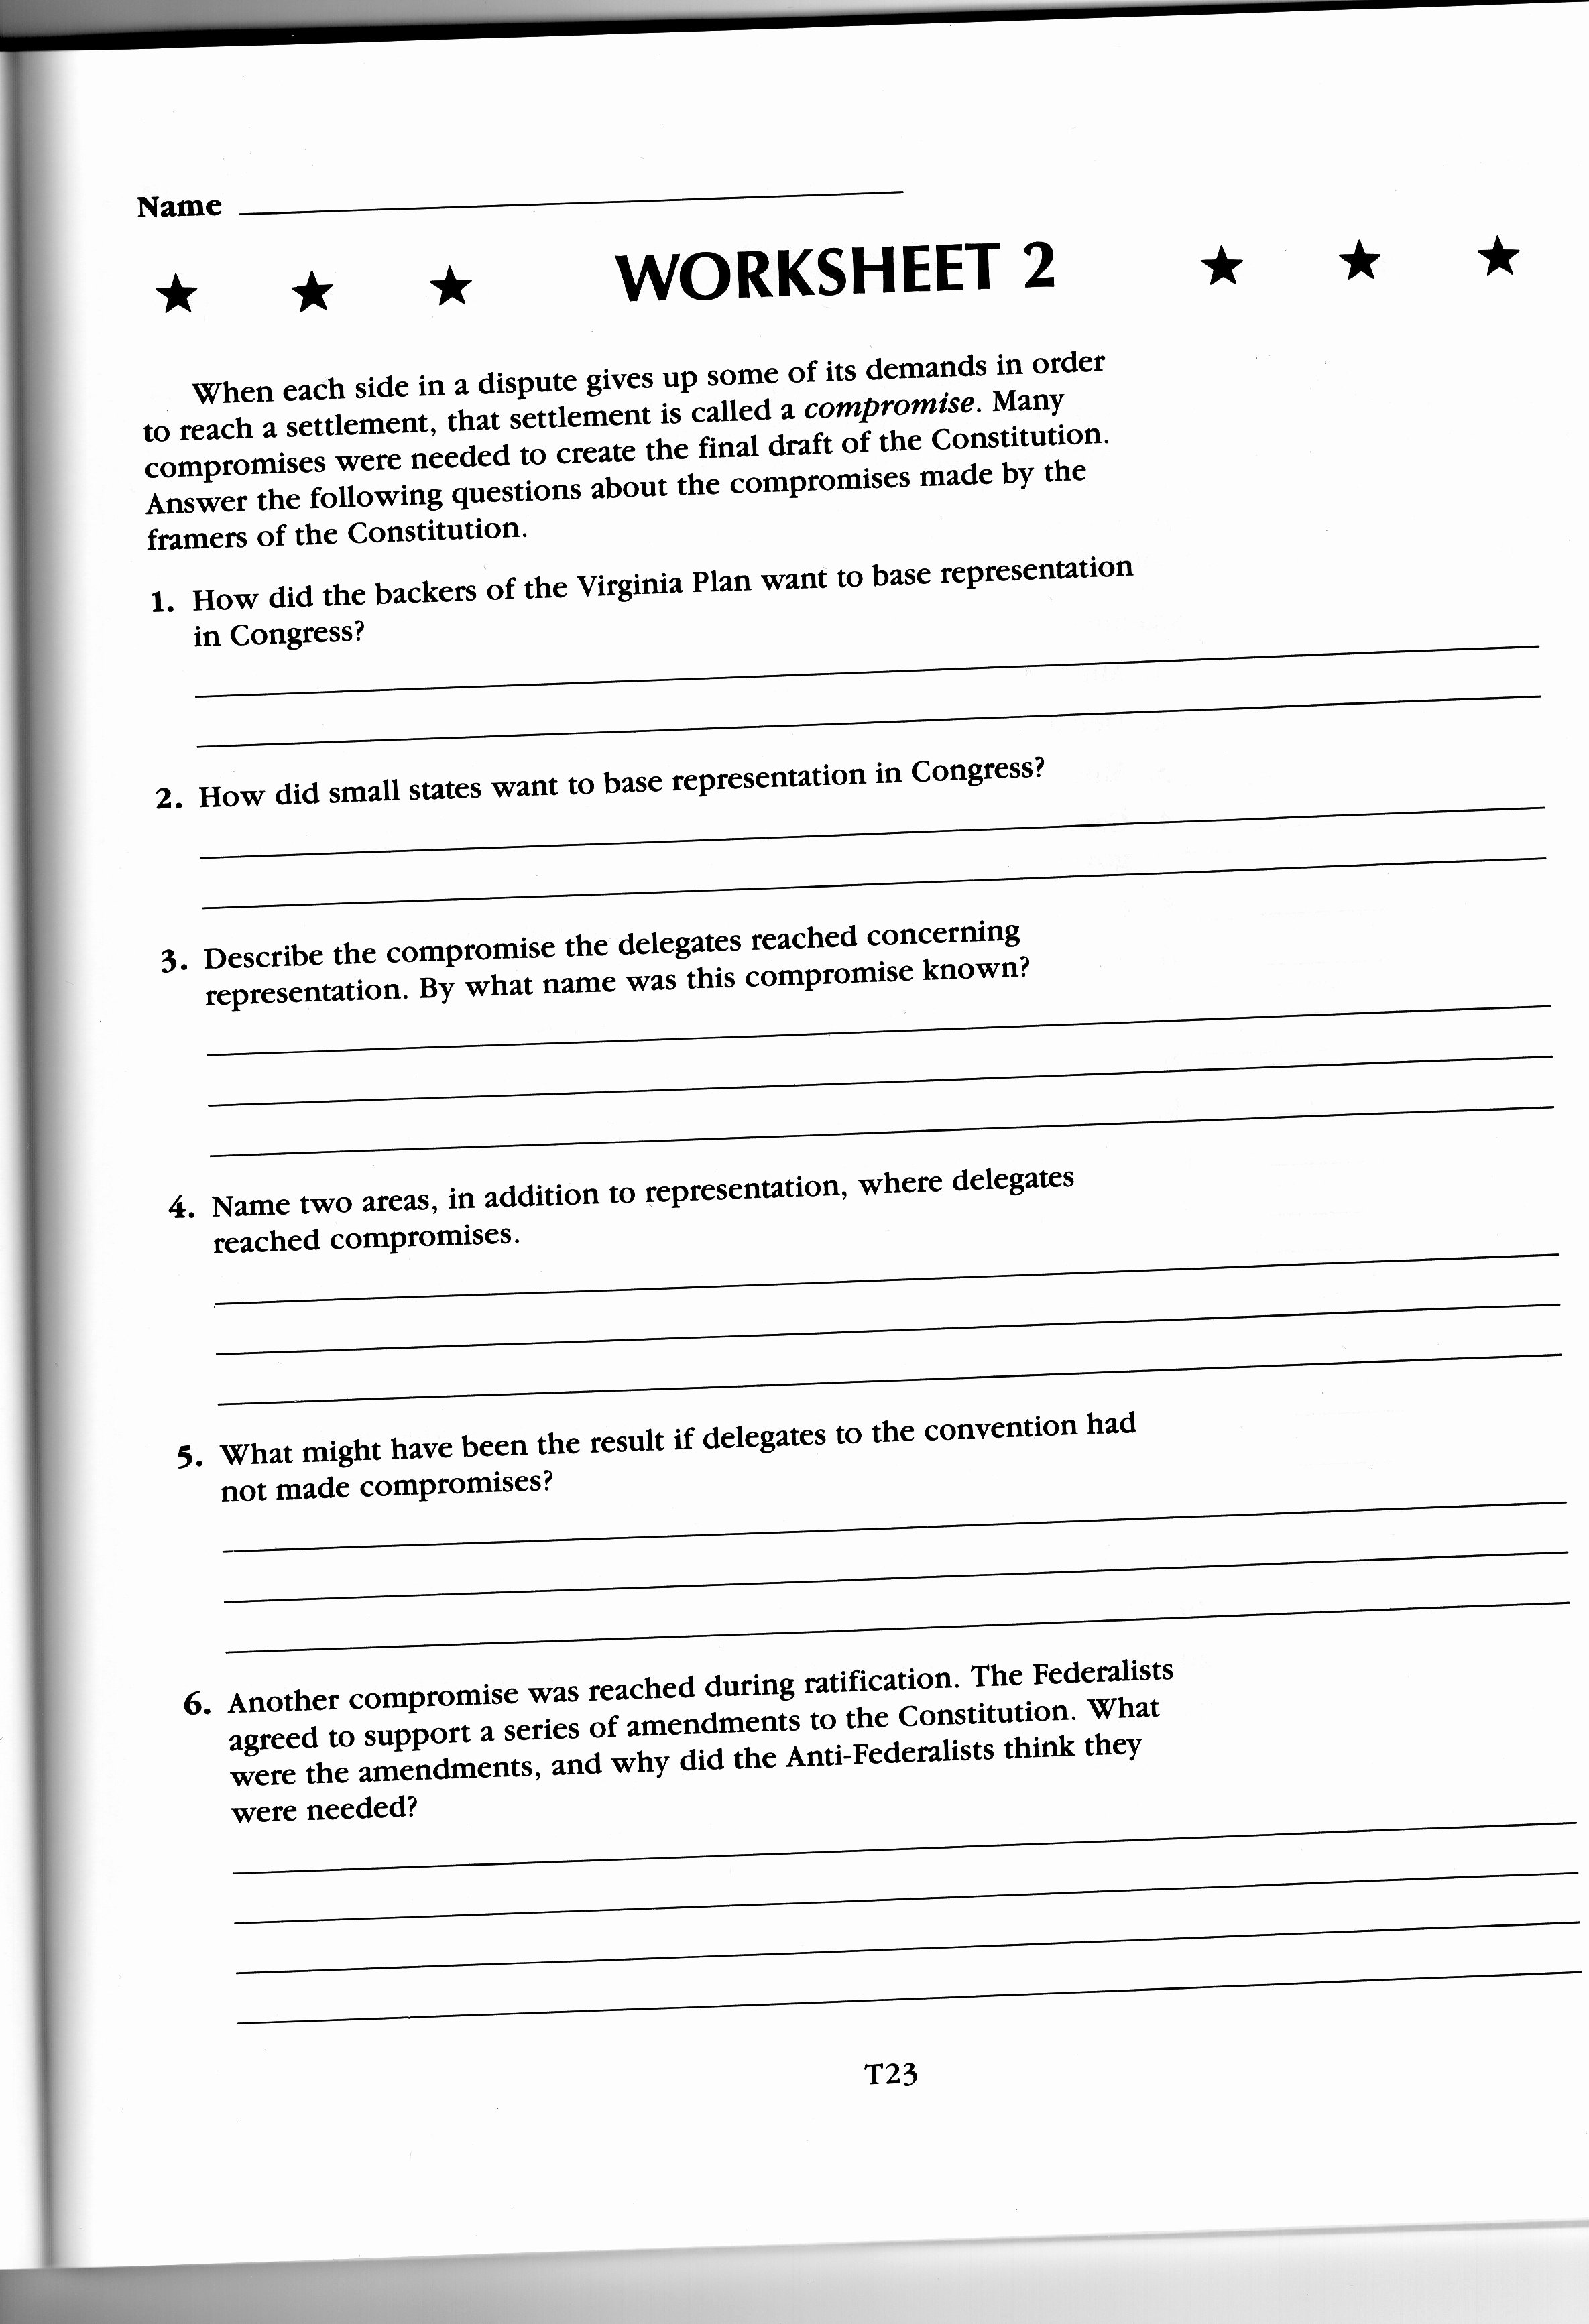 Ratifying the Constitution Worksheet Answers Best Of Foundations Ms Hawkins social Stu S